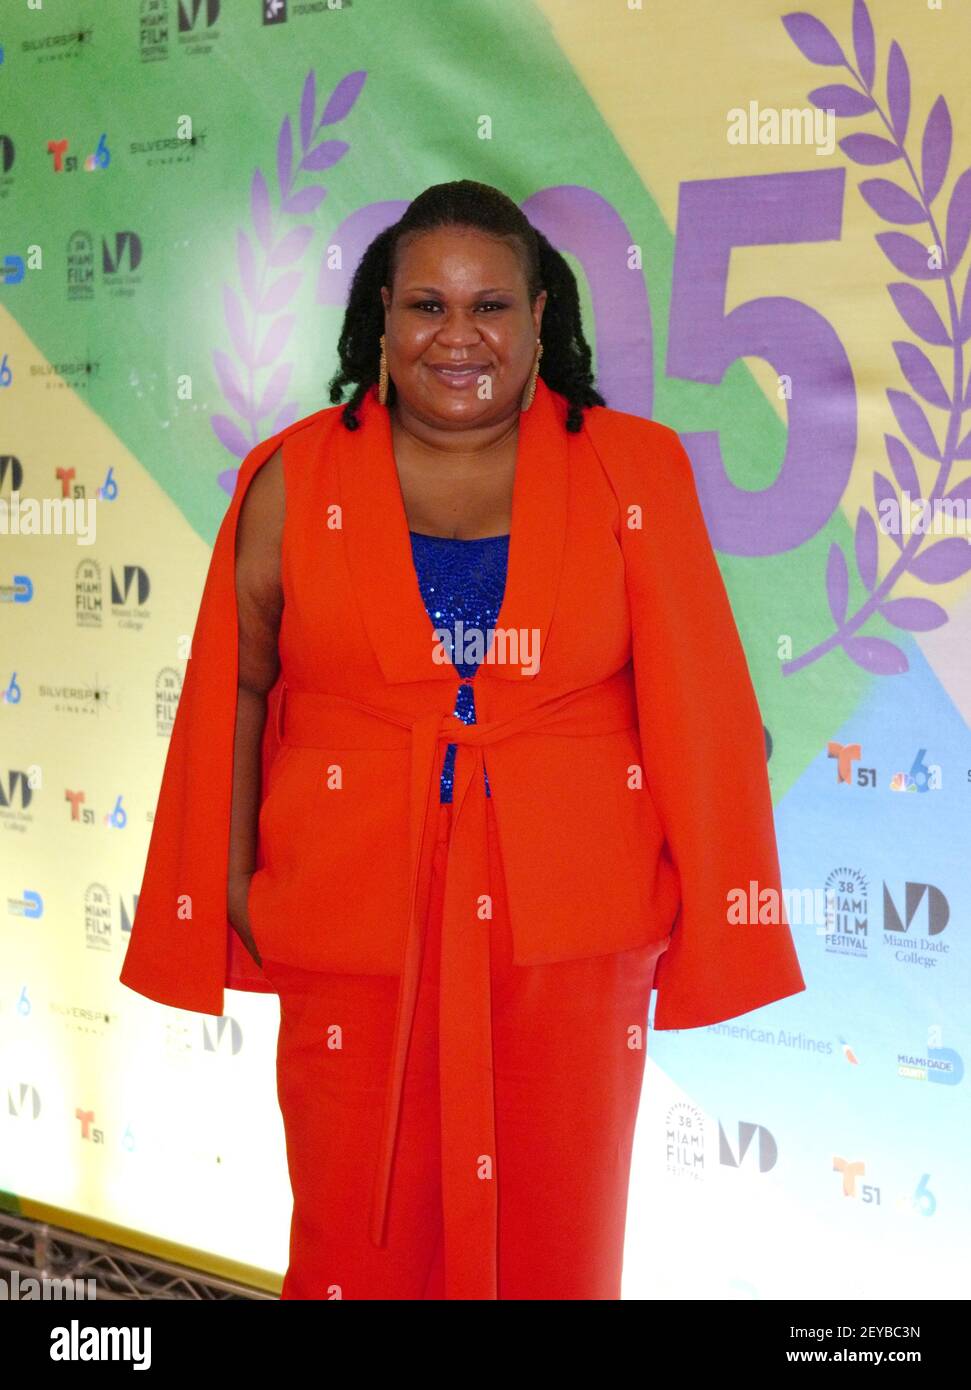 Miami, United States. 05th Mar, 2021. Kerline Alce walks the red carpet at the Miami Dade College's 38th Annual Miami Film Festival Opening Night and World Premiere of LUDI at the Silverspot Cinema in Miami, Florida, Friday, March 5, 2021. Photo by Gary I Rothstein/UPI Credit: UPI/Alamy Live News Stock Photo